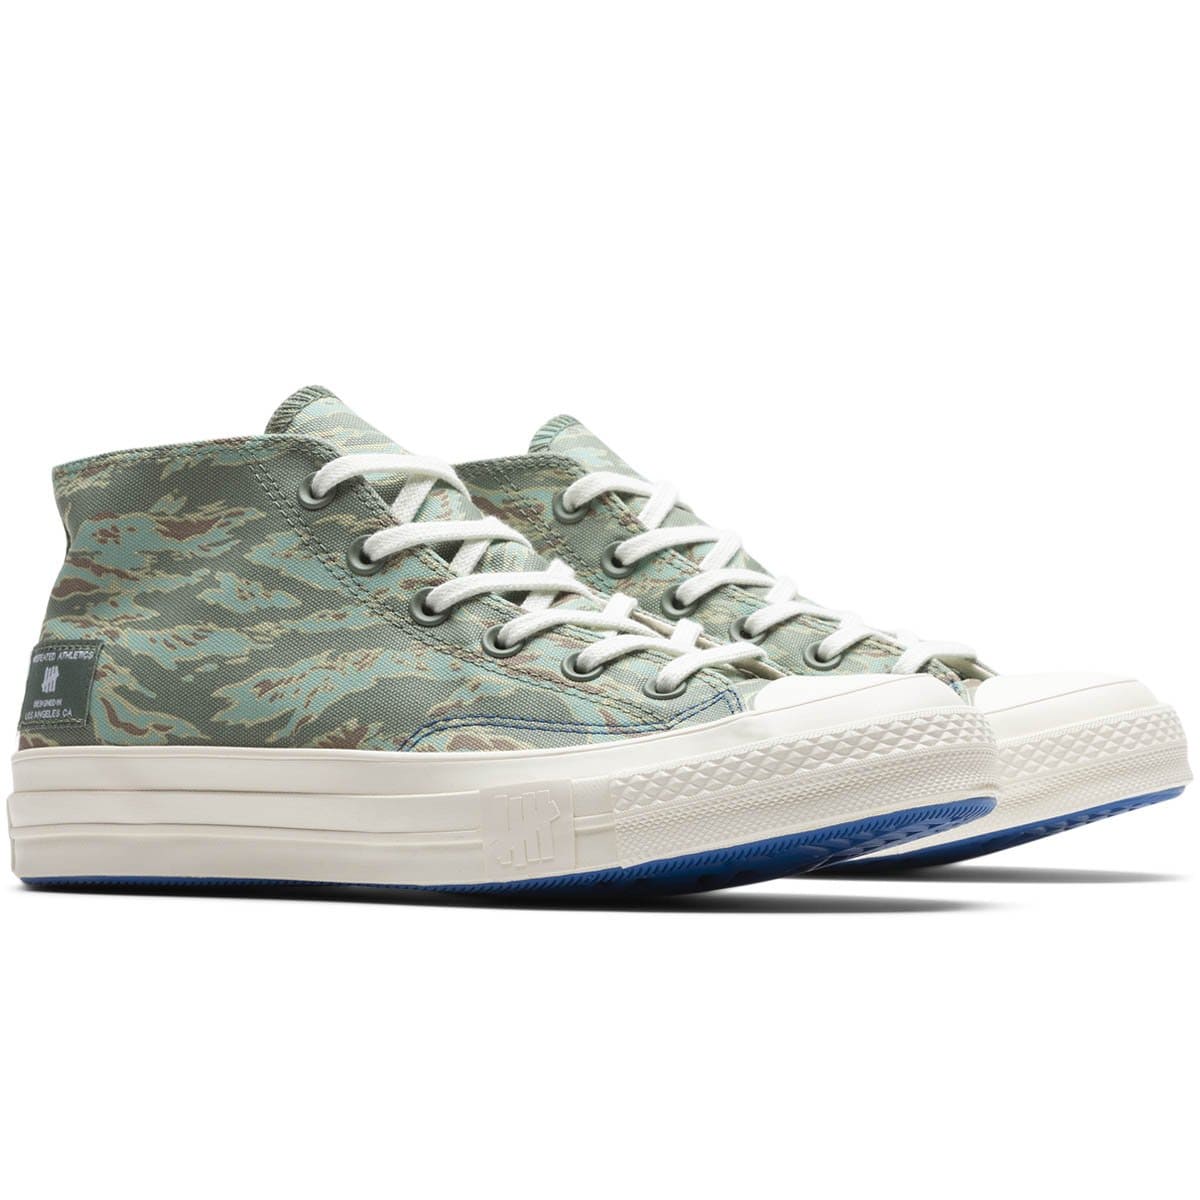 Converse Casual x UNDEFEATED CHUCK 70 MID